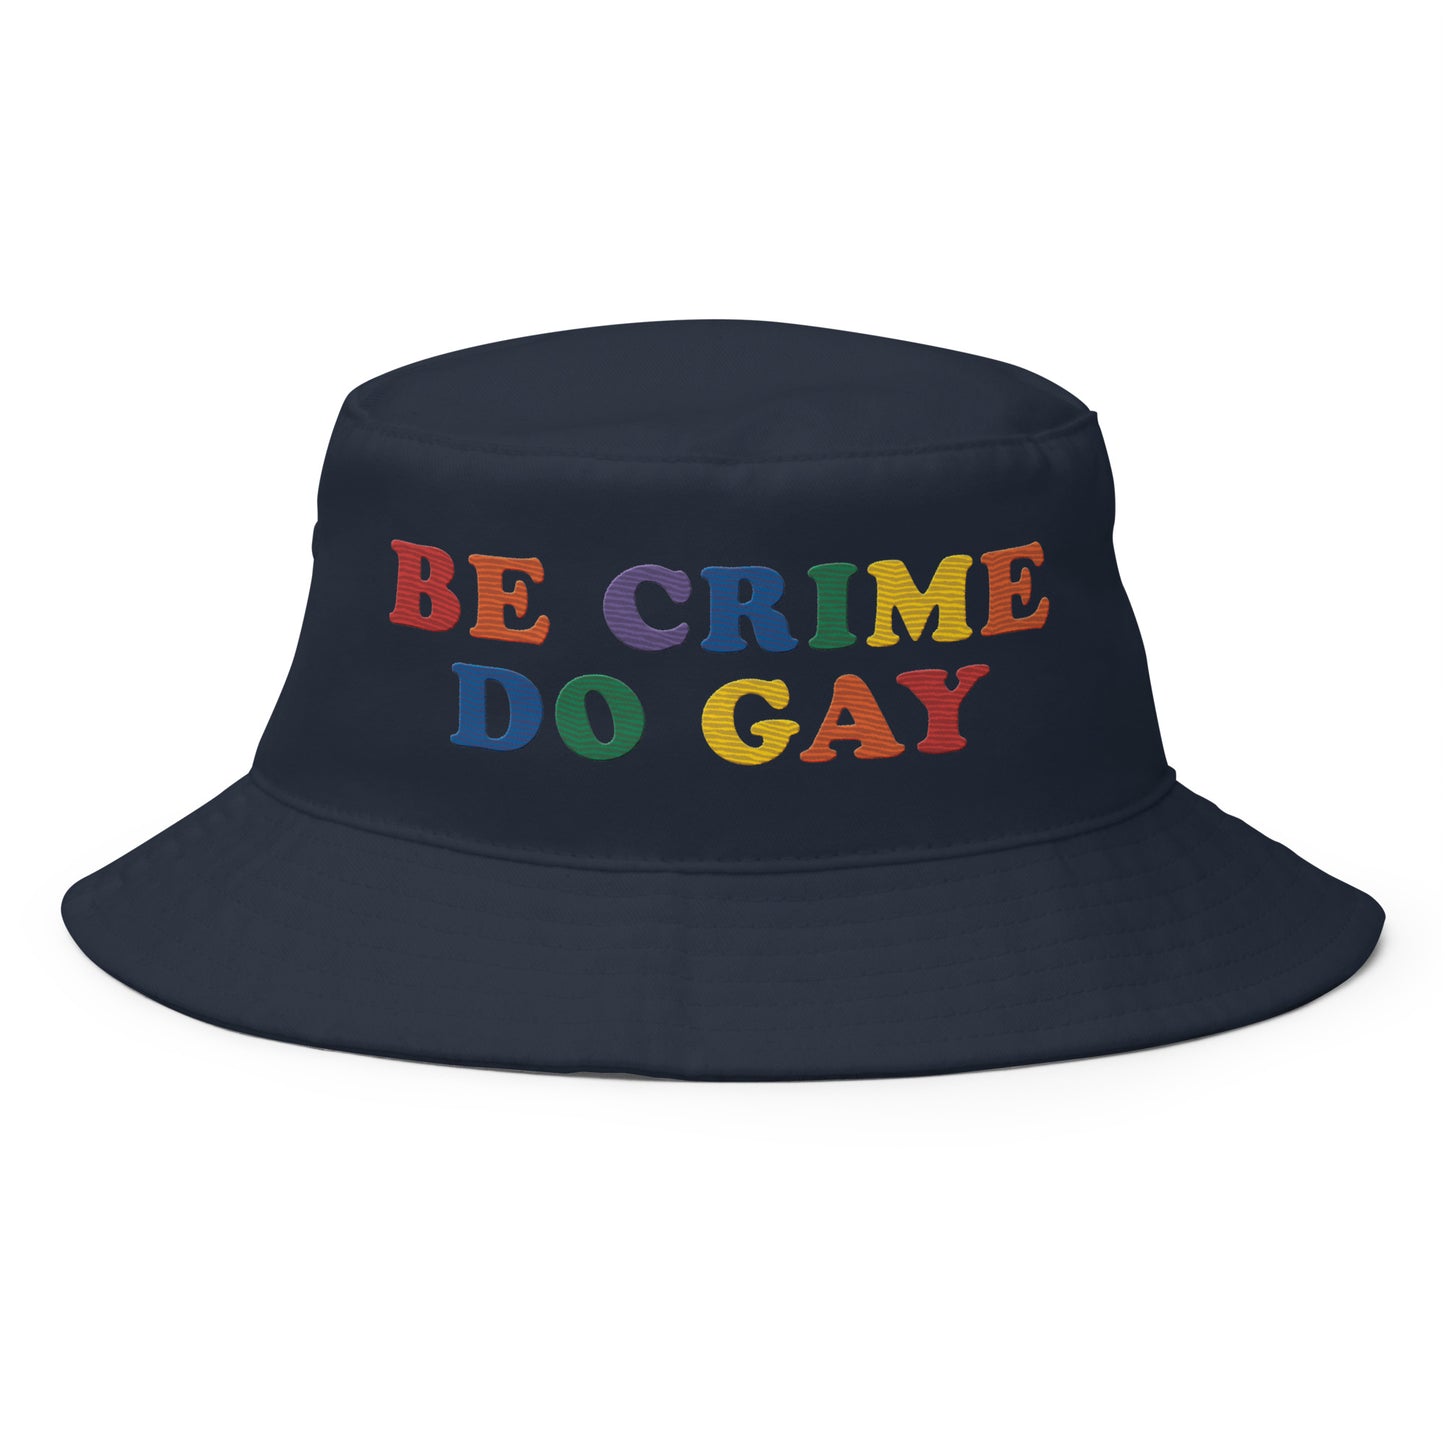 Be Crime Do Gay Bucket Hat